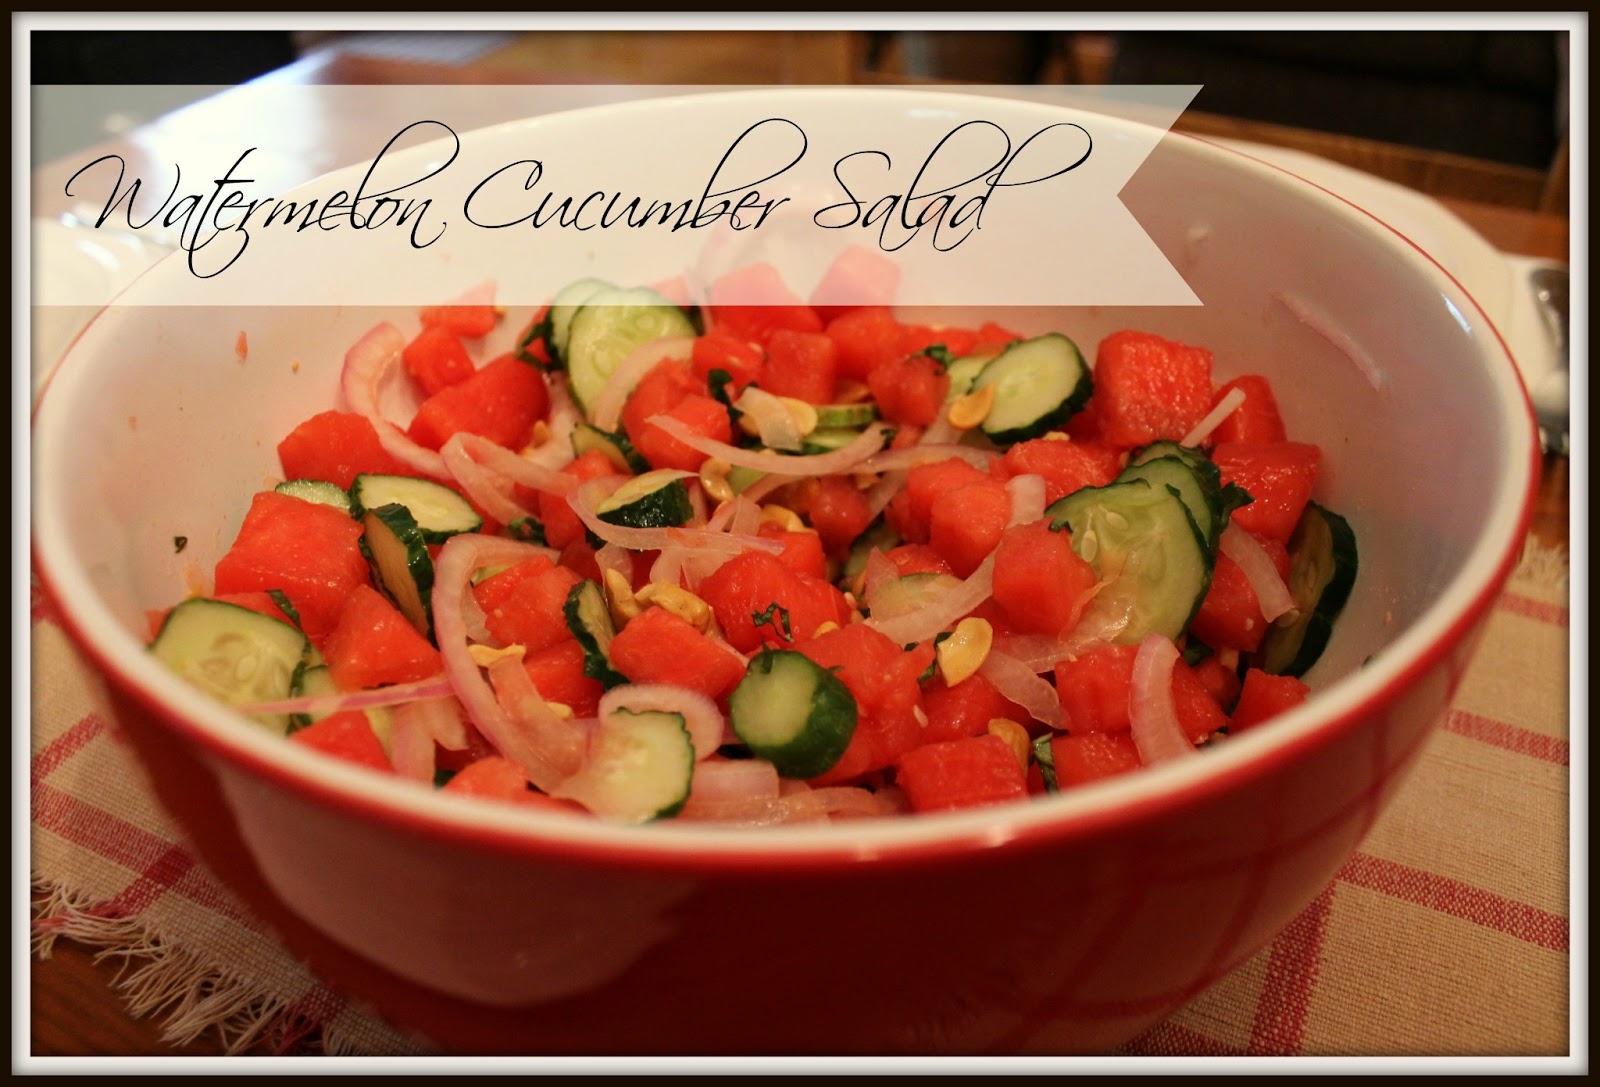 Thinking About Home: Fruit On Tuesday ~ Week 8 {Watermelon Cucumber Salad}